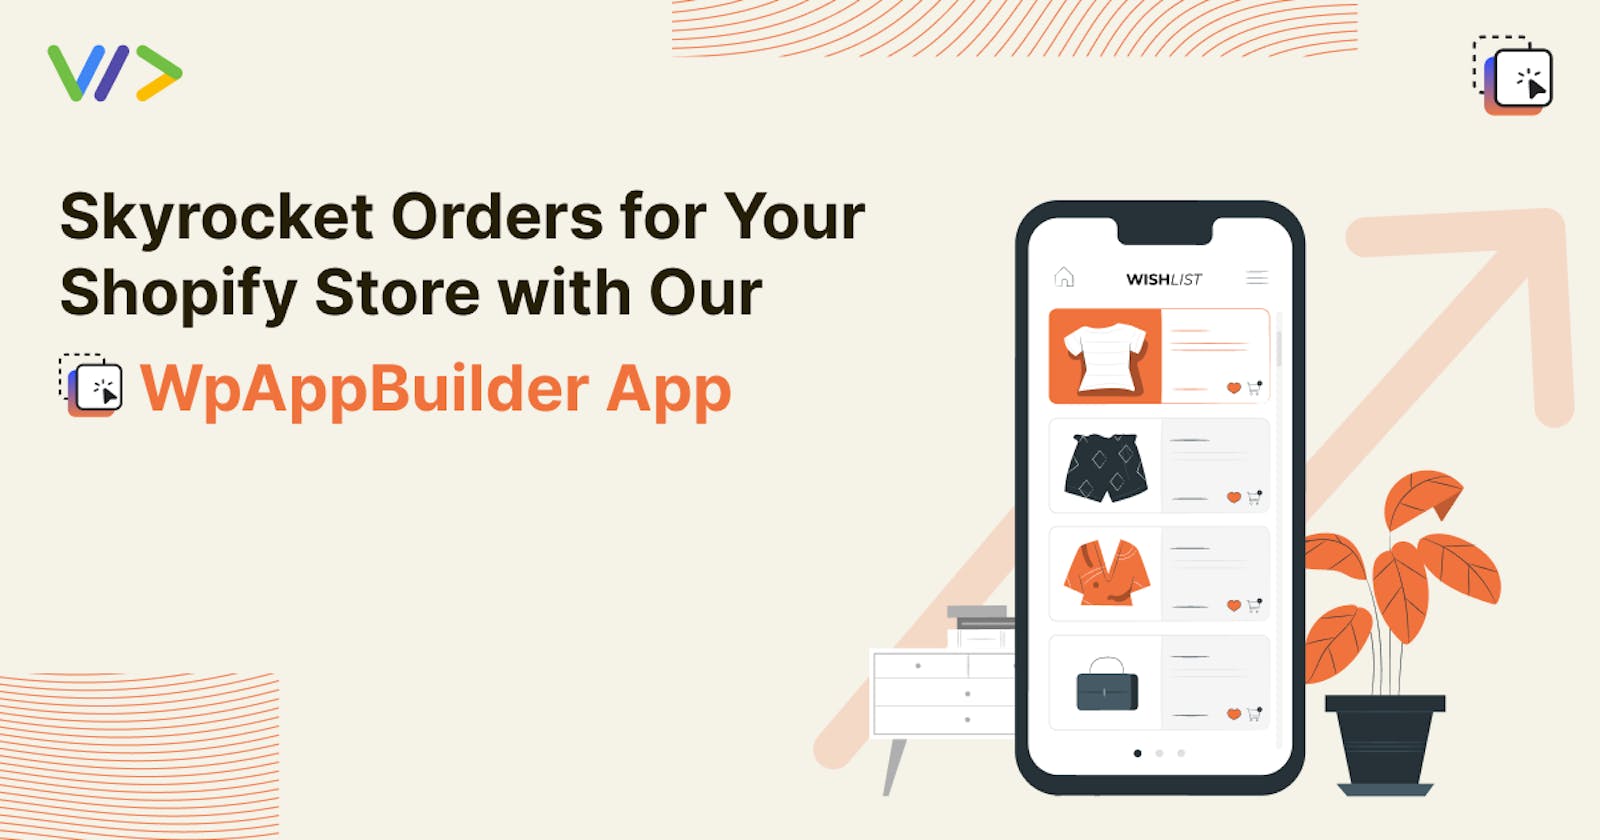 Skyrocket Orders for Your Shopify Shop with Our WPAppBuilder App